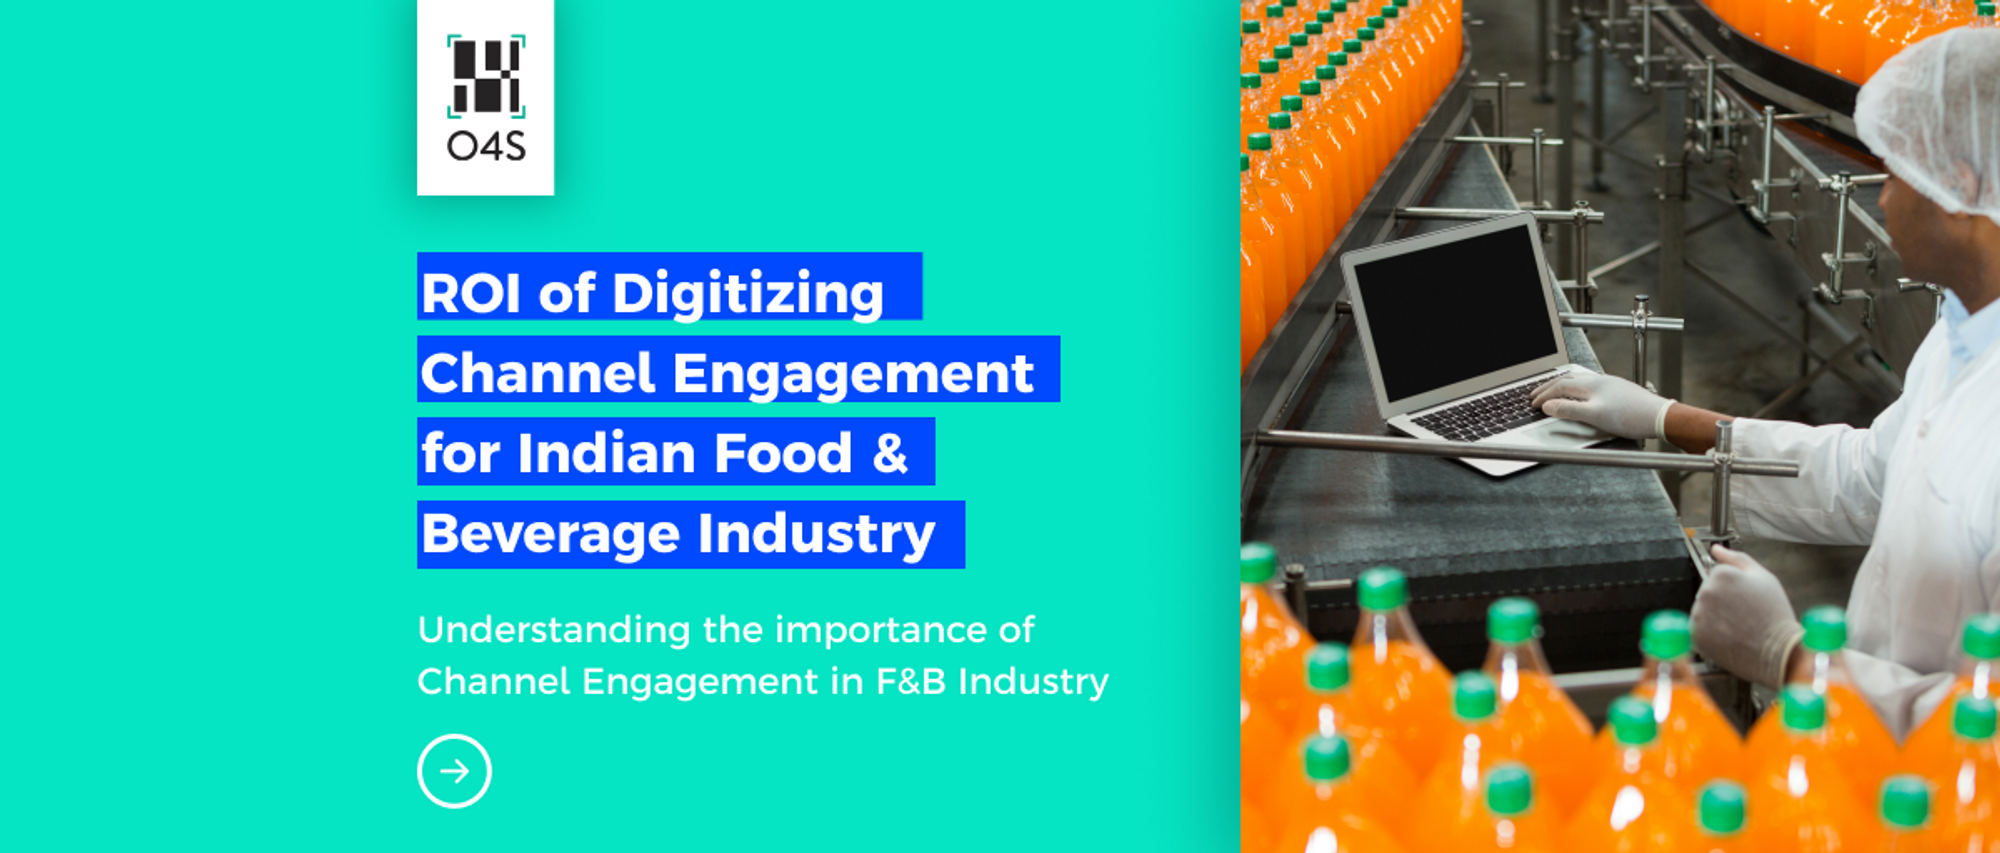 ROI of Digitizing Channel Engagement for Indian Food & Beverage Industry